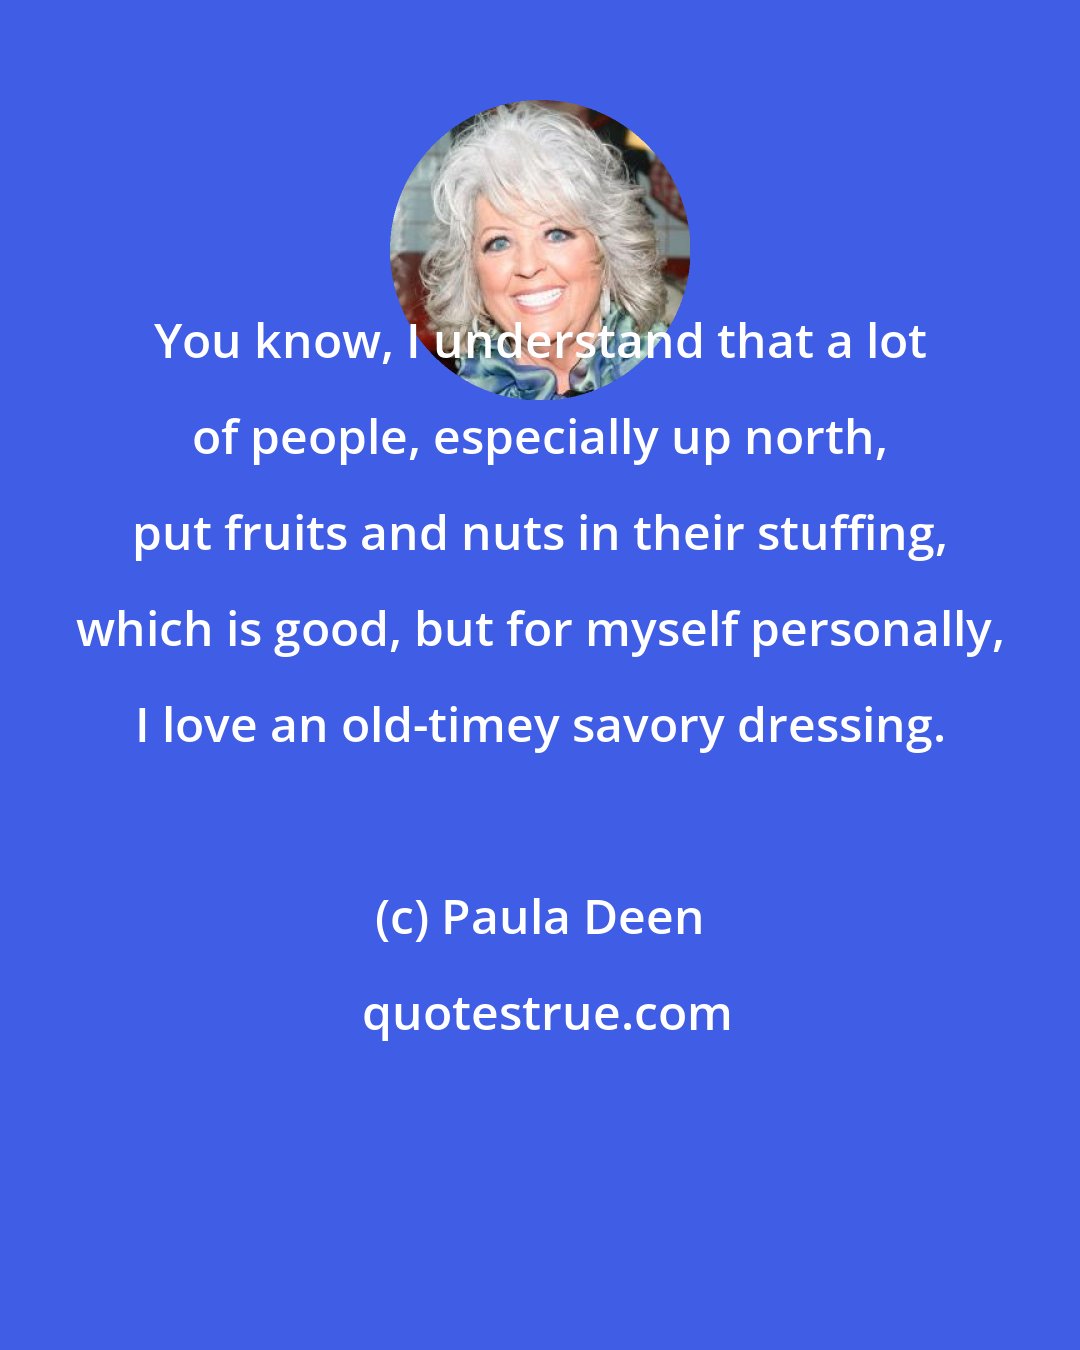 Paula Deen: You know, I understand that a lot of people, especially up north, put fruits and nuts in their stuffing, which is good, but for myself personally, I love an old-timey savory dressing.